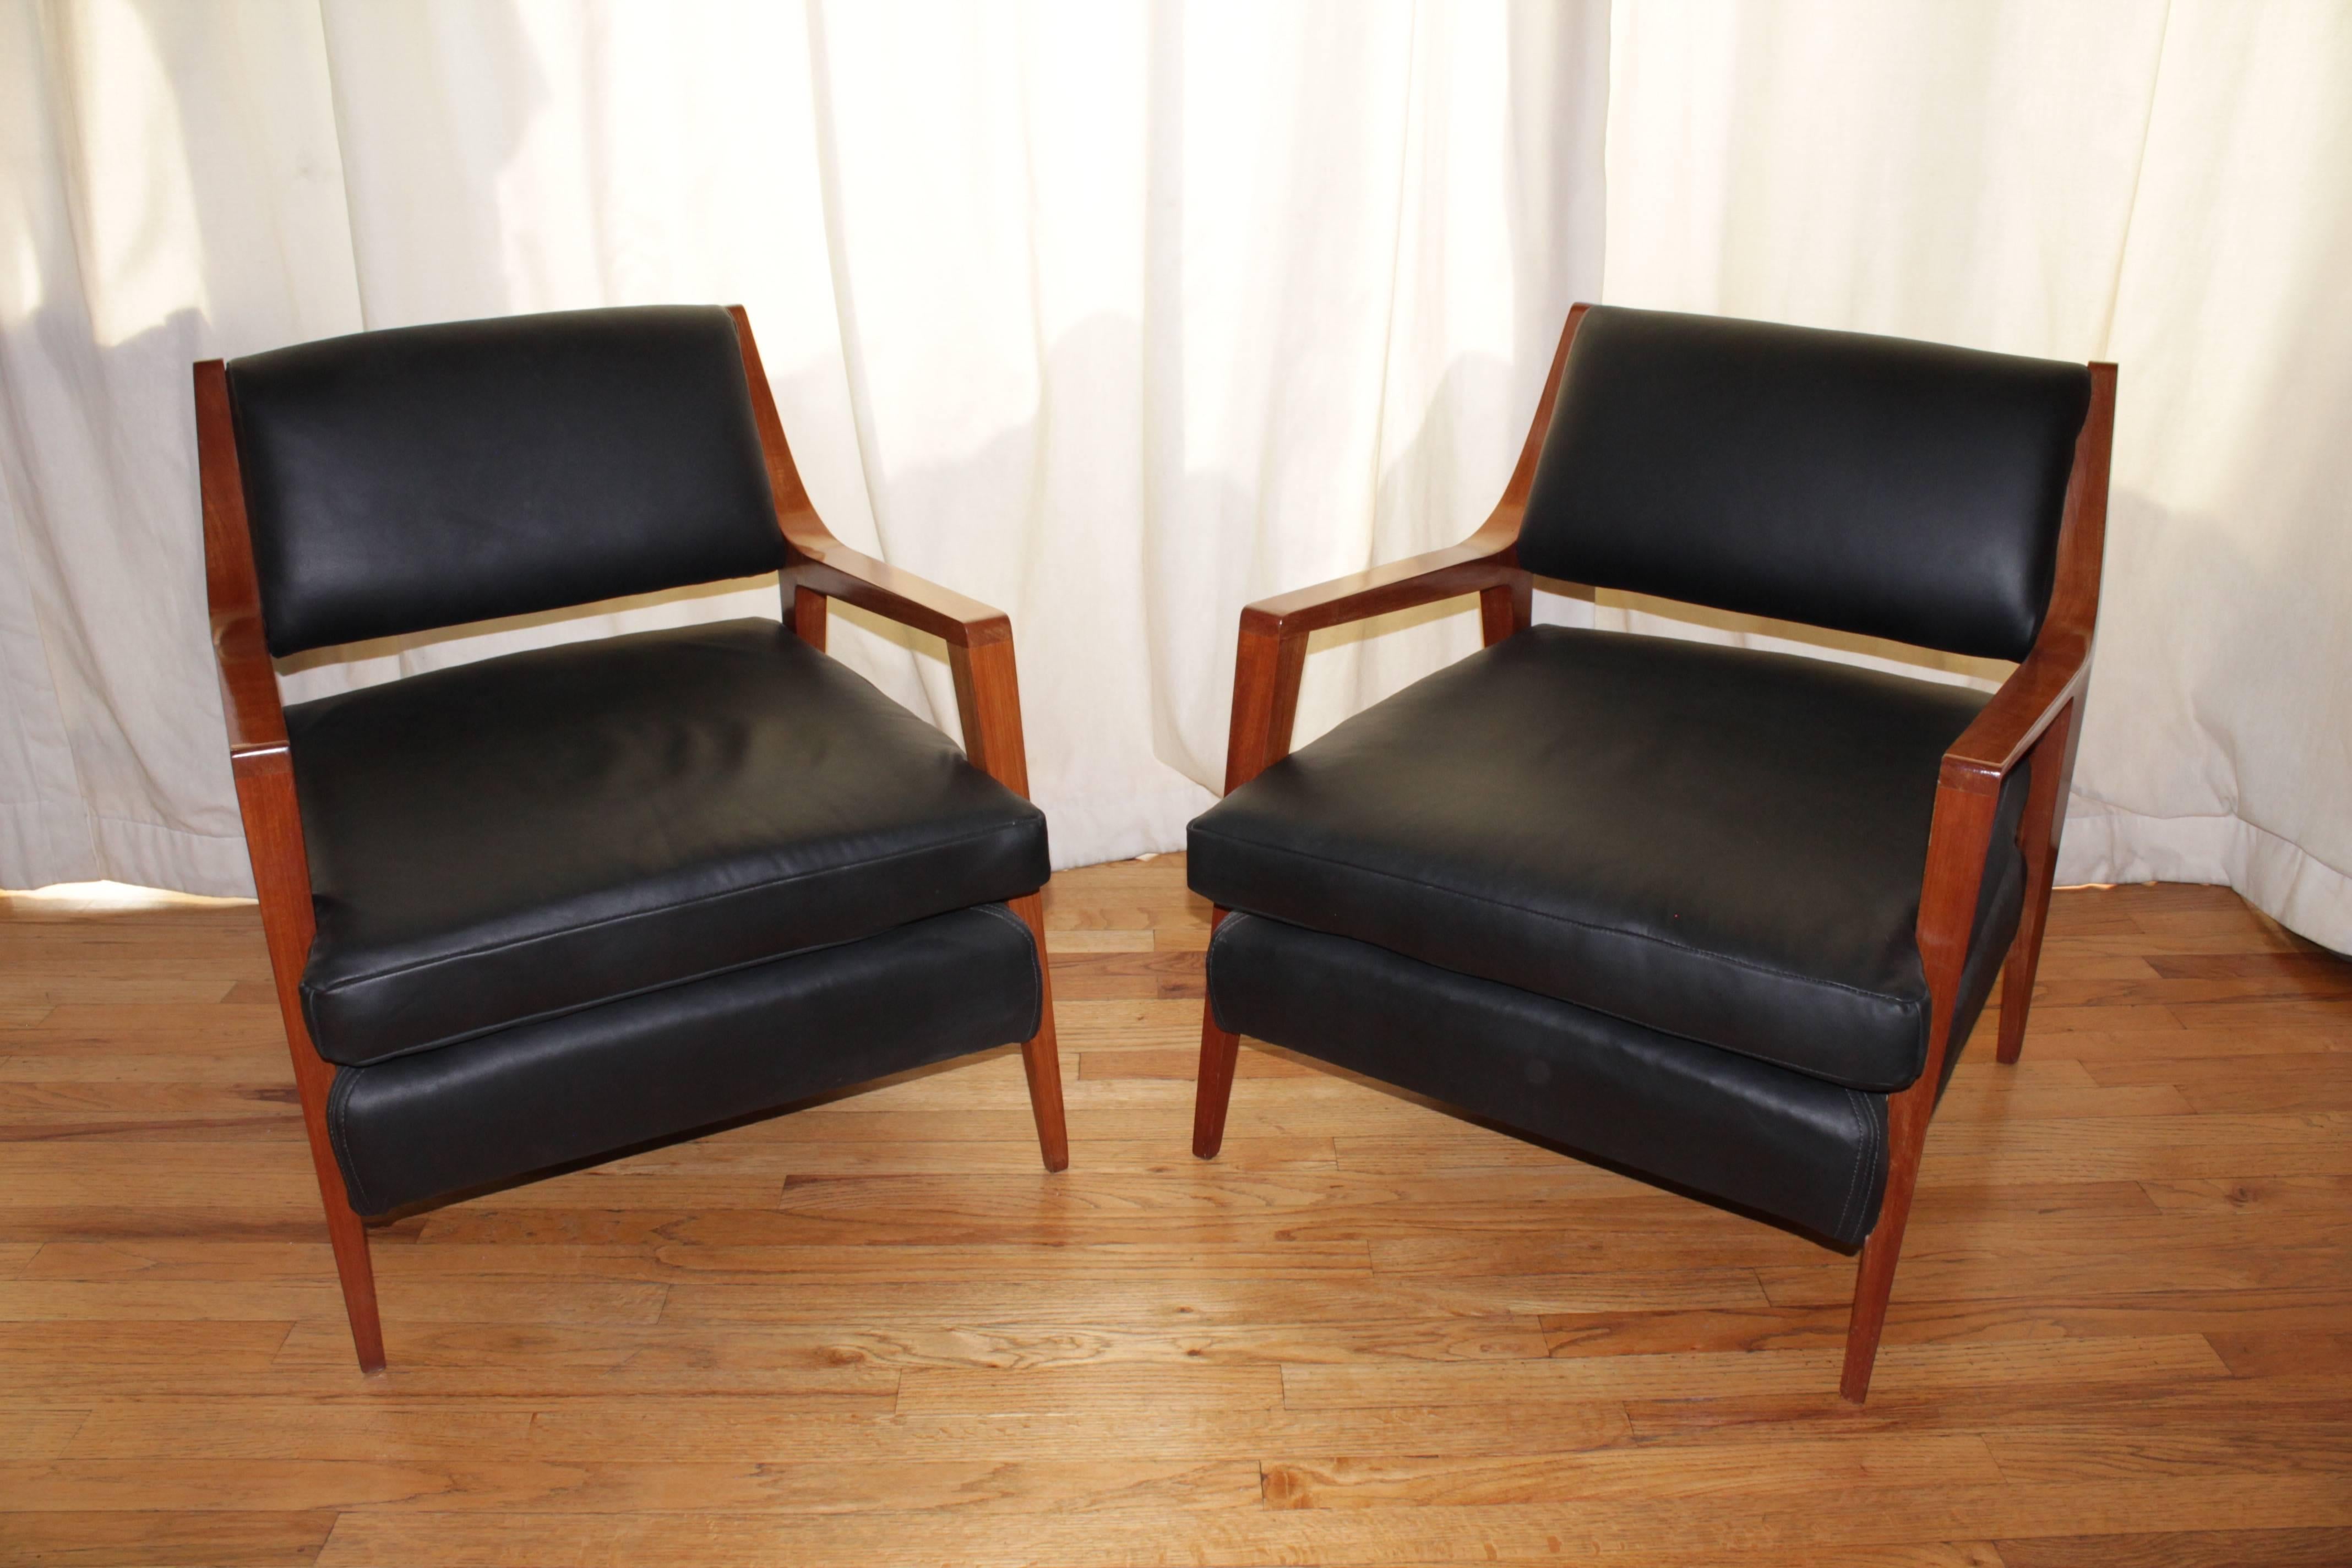 Pair of Van Beuren Chairs of Mahogany Wood with Black Leather Seats In Good Condition For Sale In Ciudad de Mexico, MX